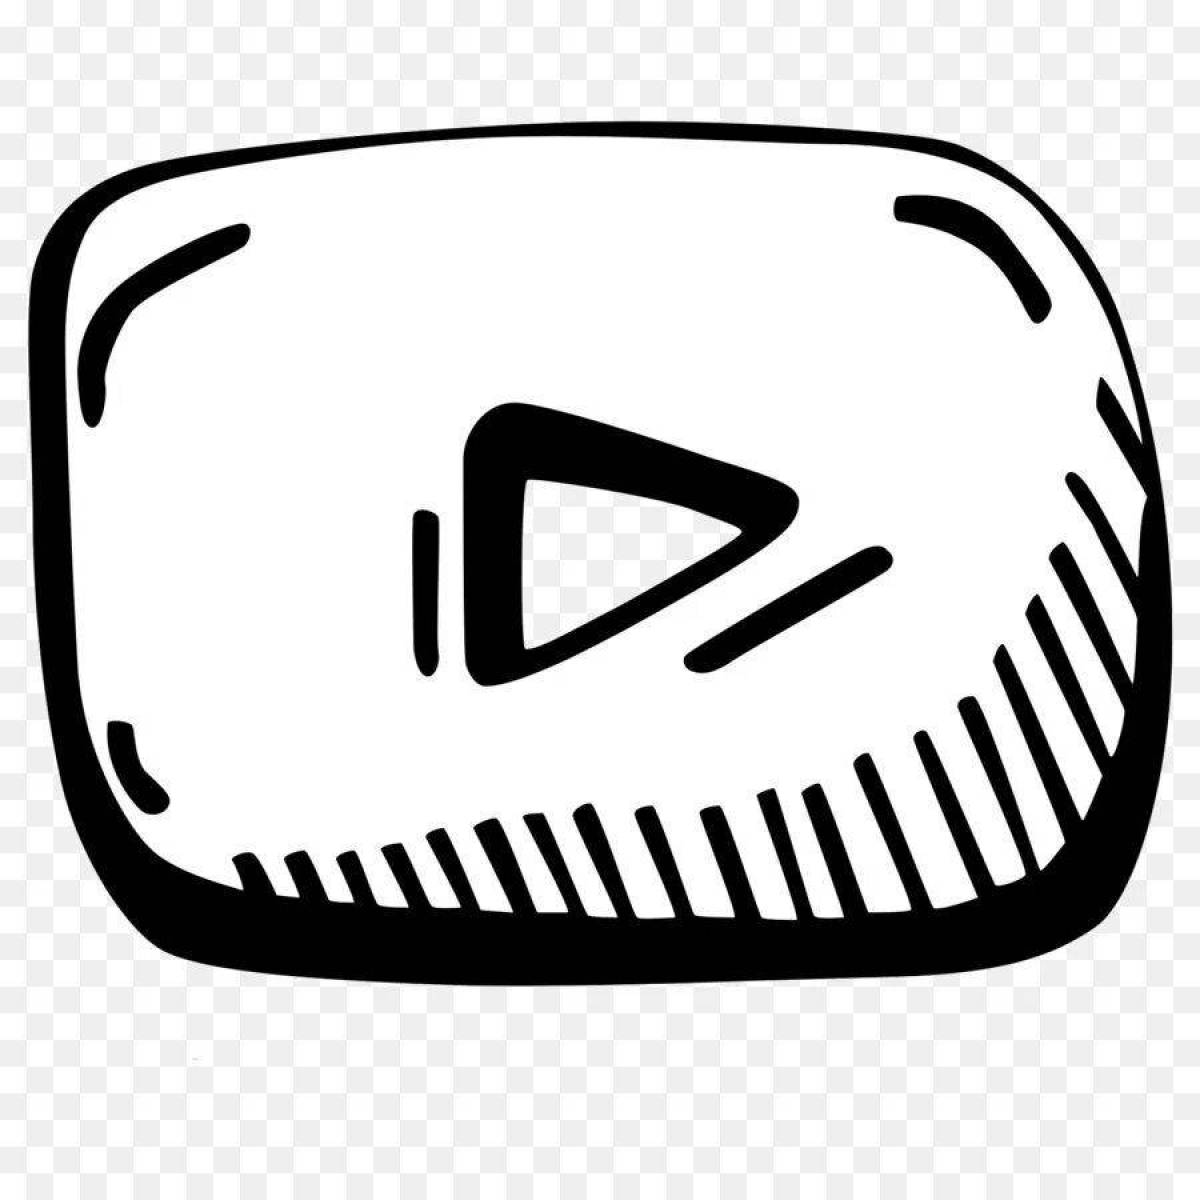 Youtube joyful button coloring page